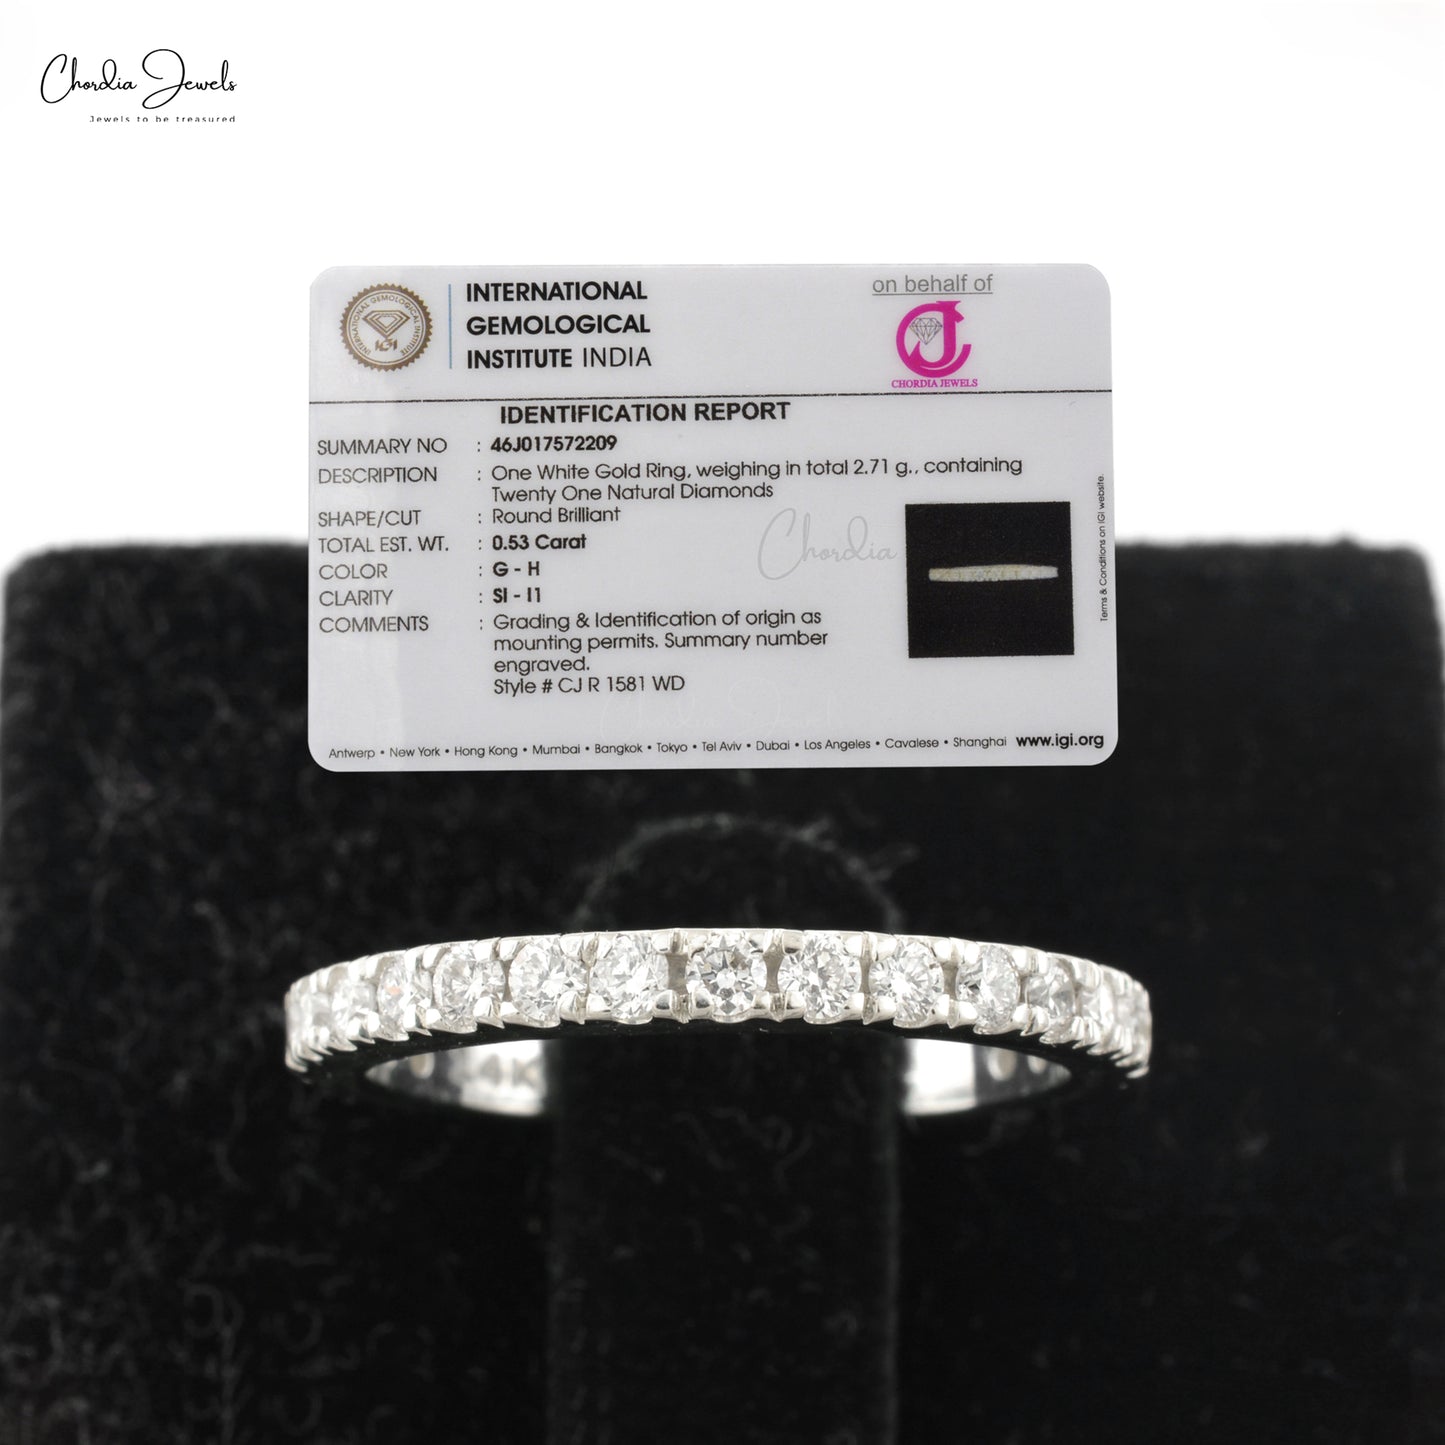 Load image into Gallery viewer, 14k Solid White Gold Diamond Ring, 1.70mm Round Cut Pave Set Engagement Ring, 0.53 Carats G-H White Diamond Half Eternity Band, IGI Certified Diamond Band For Gift (Size 6)
